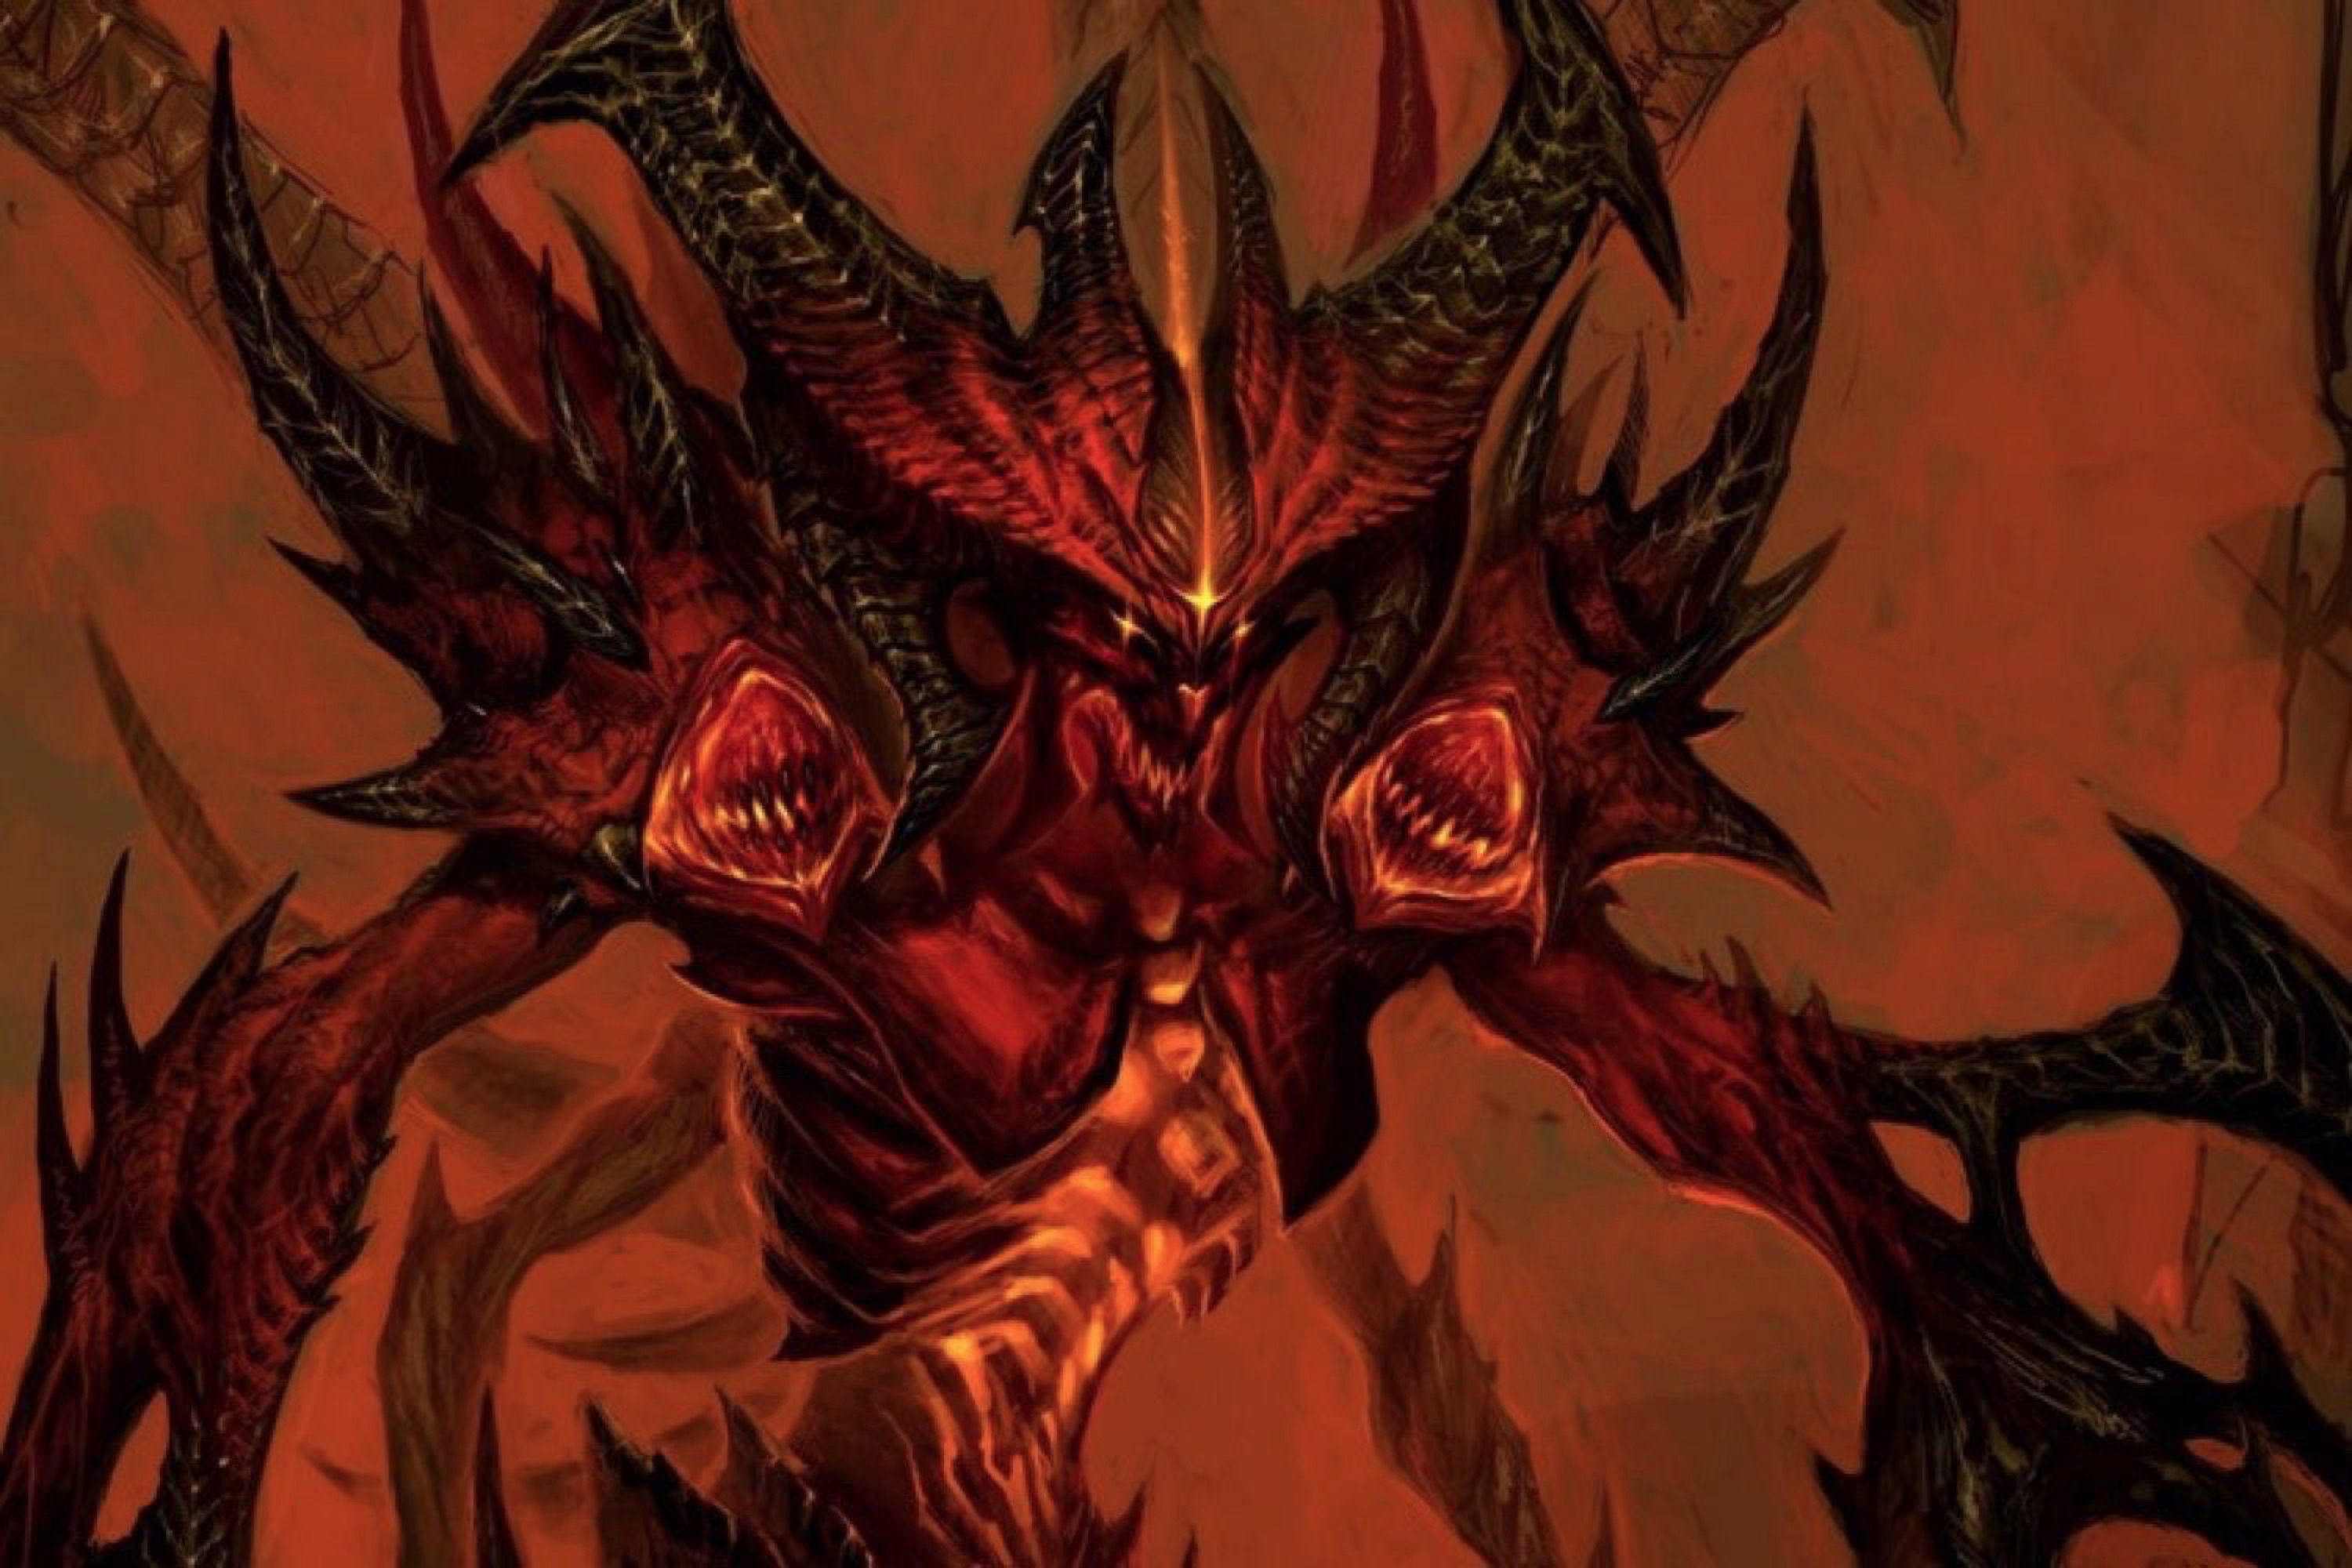 diablo immortal on mobile is looking to defy fan backlash by being really good